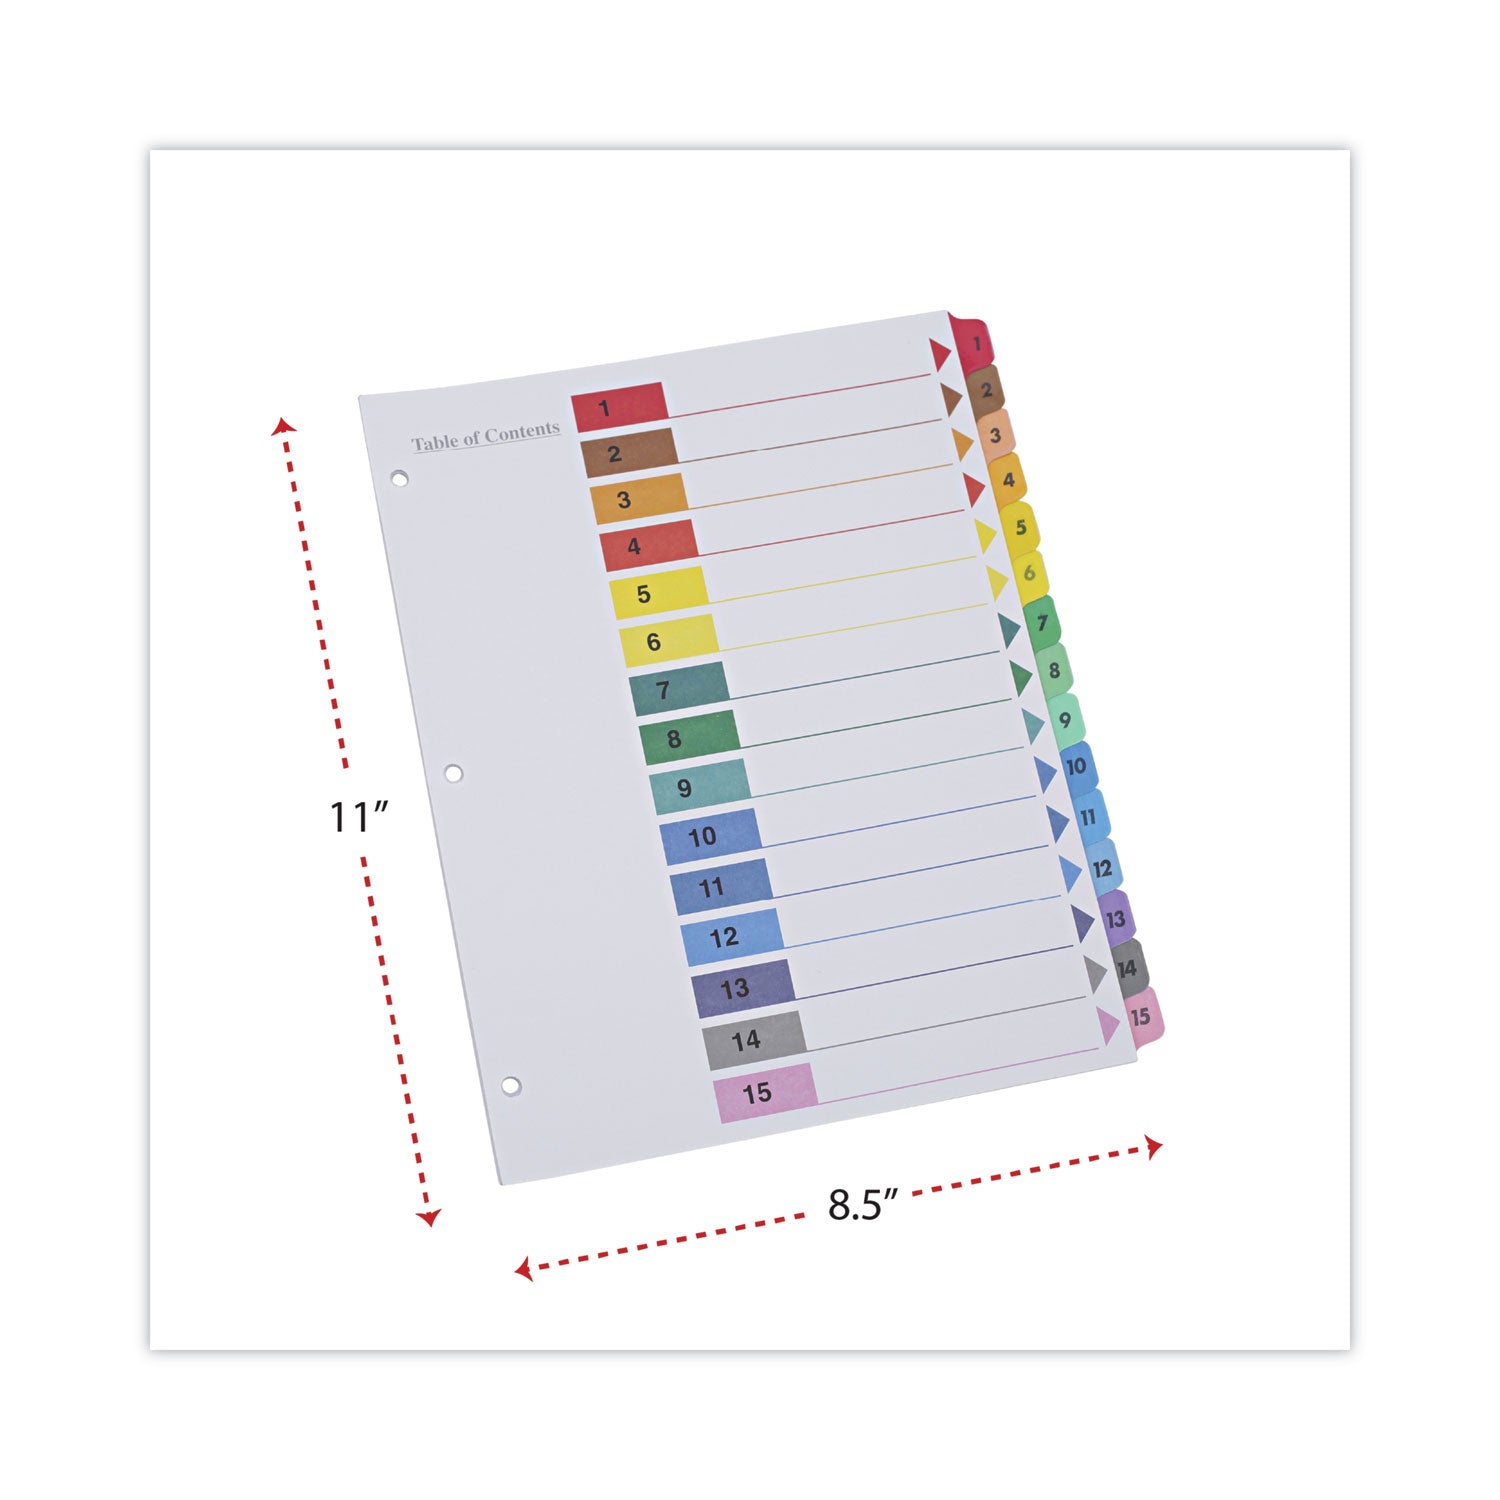 Deluxe Table of Contents Dividers for Printers, 15-Tab, 1 to 15; Table Of Contents, 11 x 8.5, White, 6 Sets - 